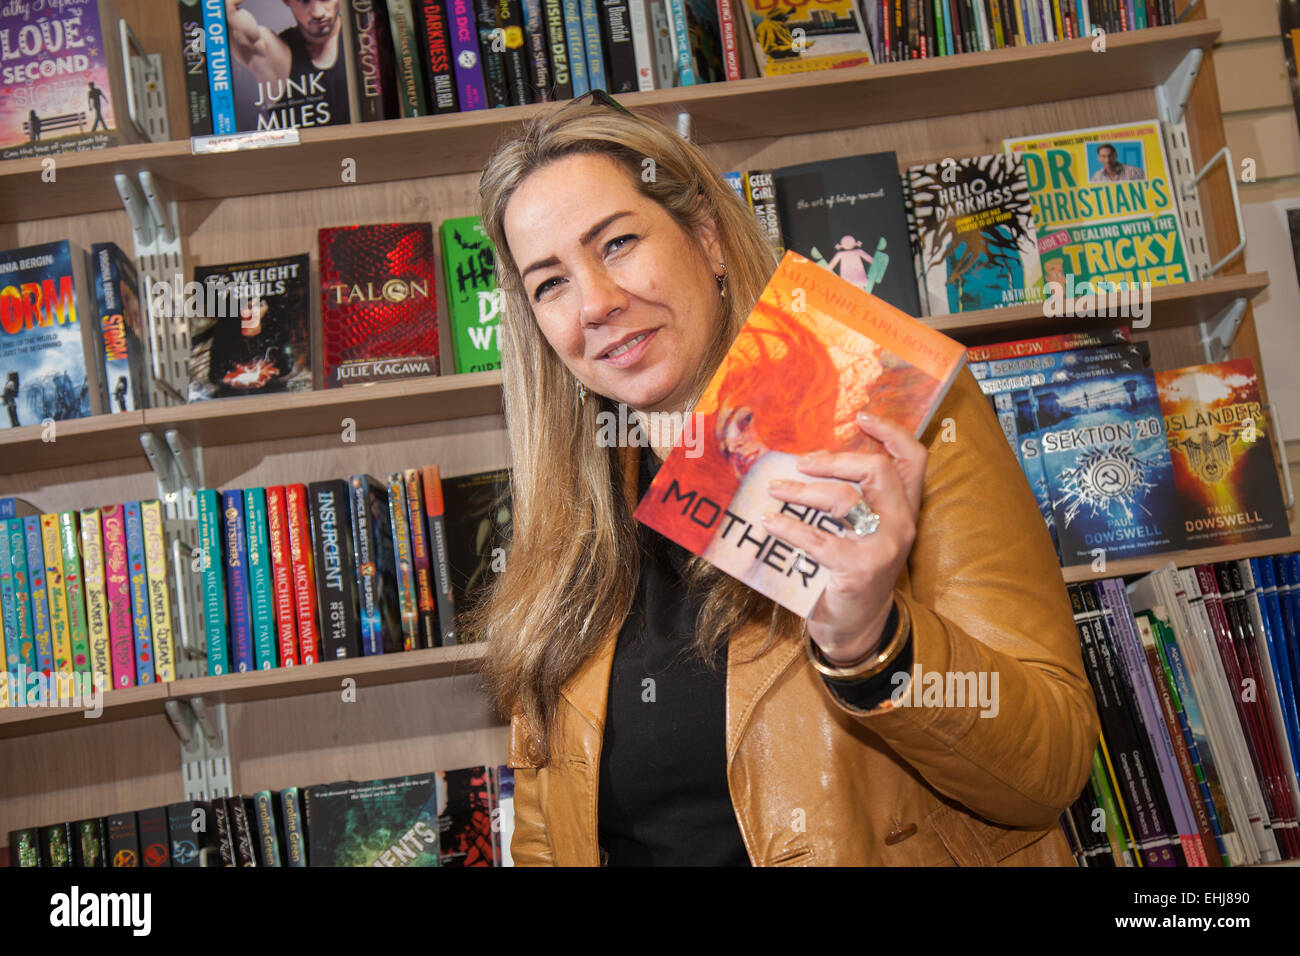 Formby, Southport, Merseyside UK. 14th March, 2015. Sally-Anne Tapia-Bowes book signing at Formby Books. Sally-Anne Tapia-Bowes graduated at Hope University with a degree in English Literature and Contemporary Art. She is a past employee of Pearson Edexcel having worked as a Principal Examiner for G.C.S.E. English Literature and Chief Examiner for I.G.C.S.E. English Literature.  HIS MOTHER is her debut crime novel with sequels HER FATHER and THEIR PARENTS to follow. Themes in this series include dysfunctional families, mental health, loss and regret. Stock Photo